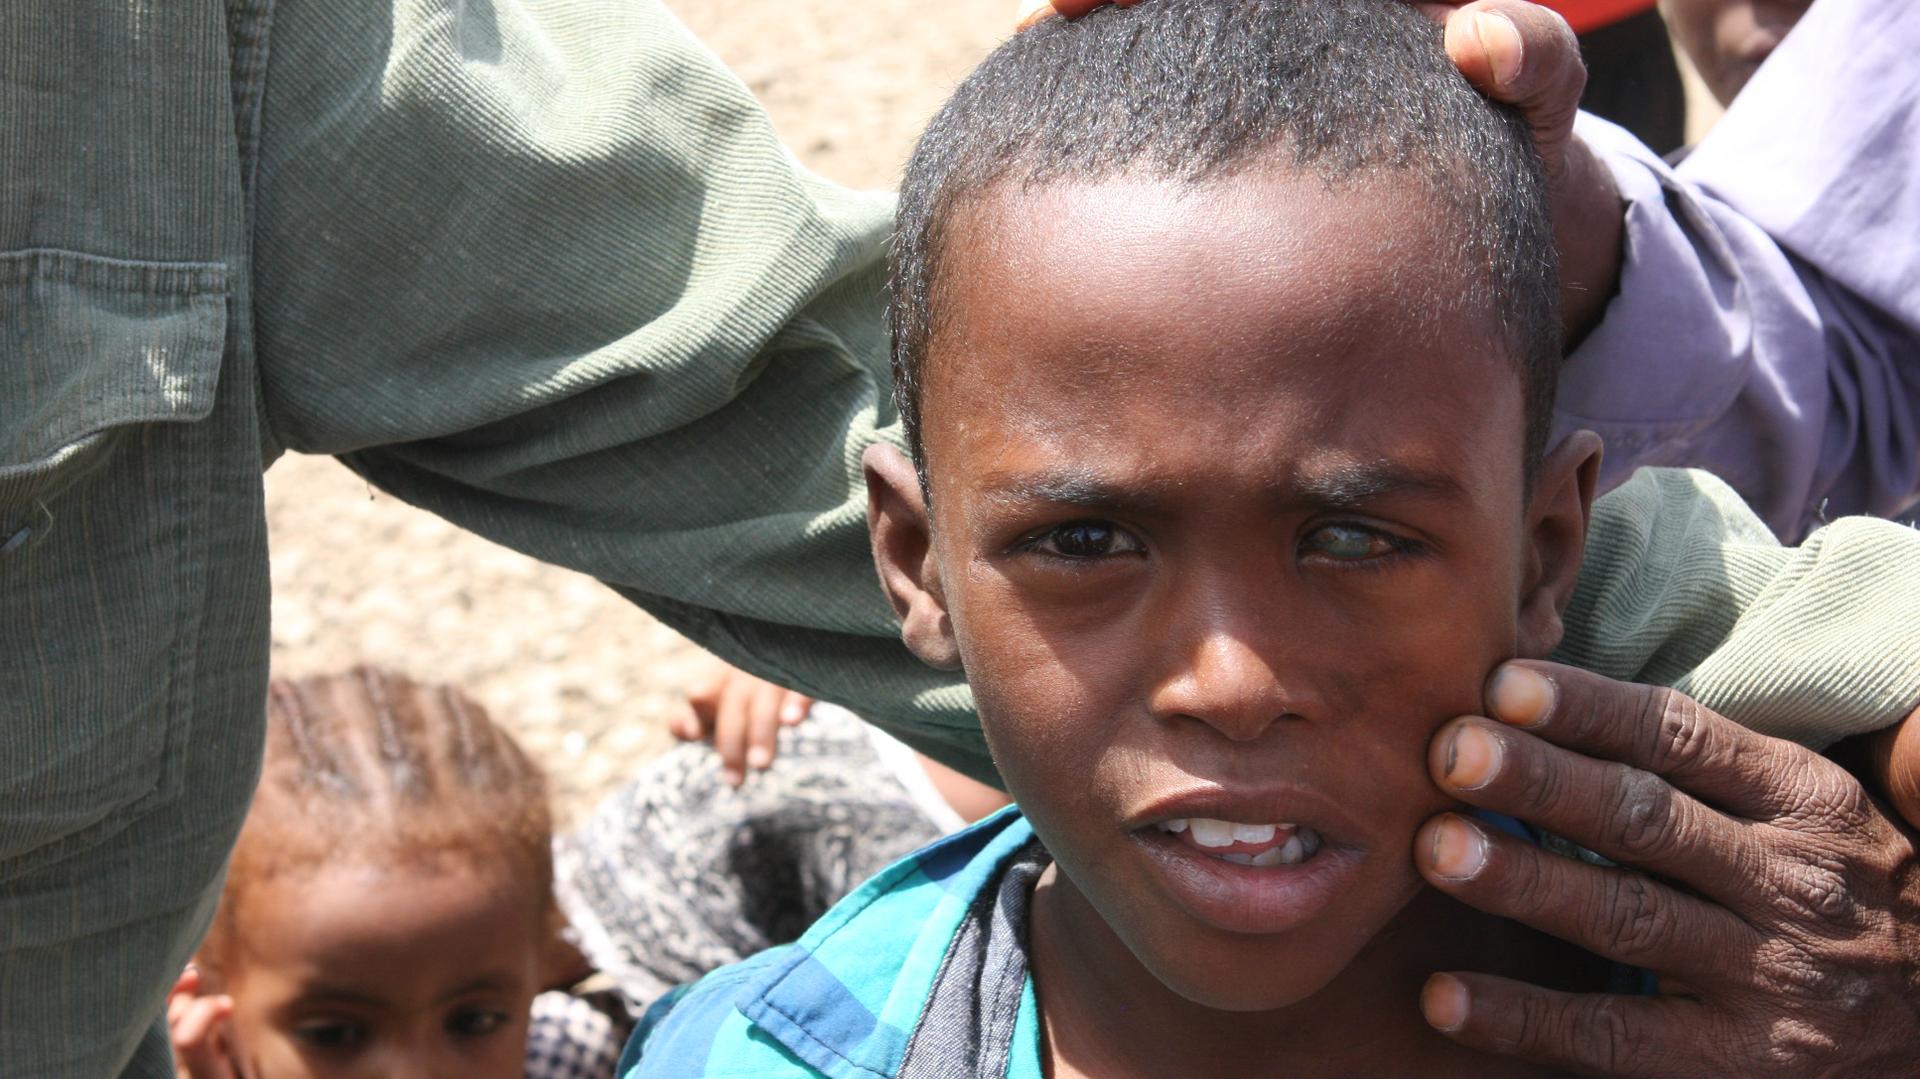 At a camp for displaced Ethiopians outside Dire Dawa, it's claimed that this Somali boy lost the sight in his left eye after Oromo police threw a rock that hit him in the face. Ethiopia is experiencing one of its worst population displacements due to viol